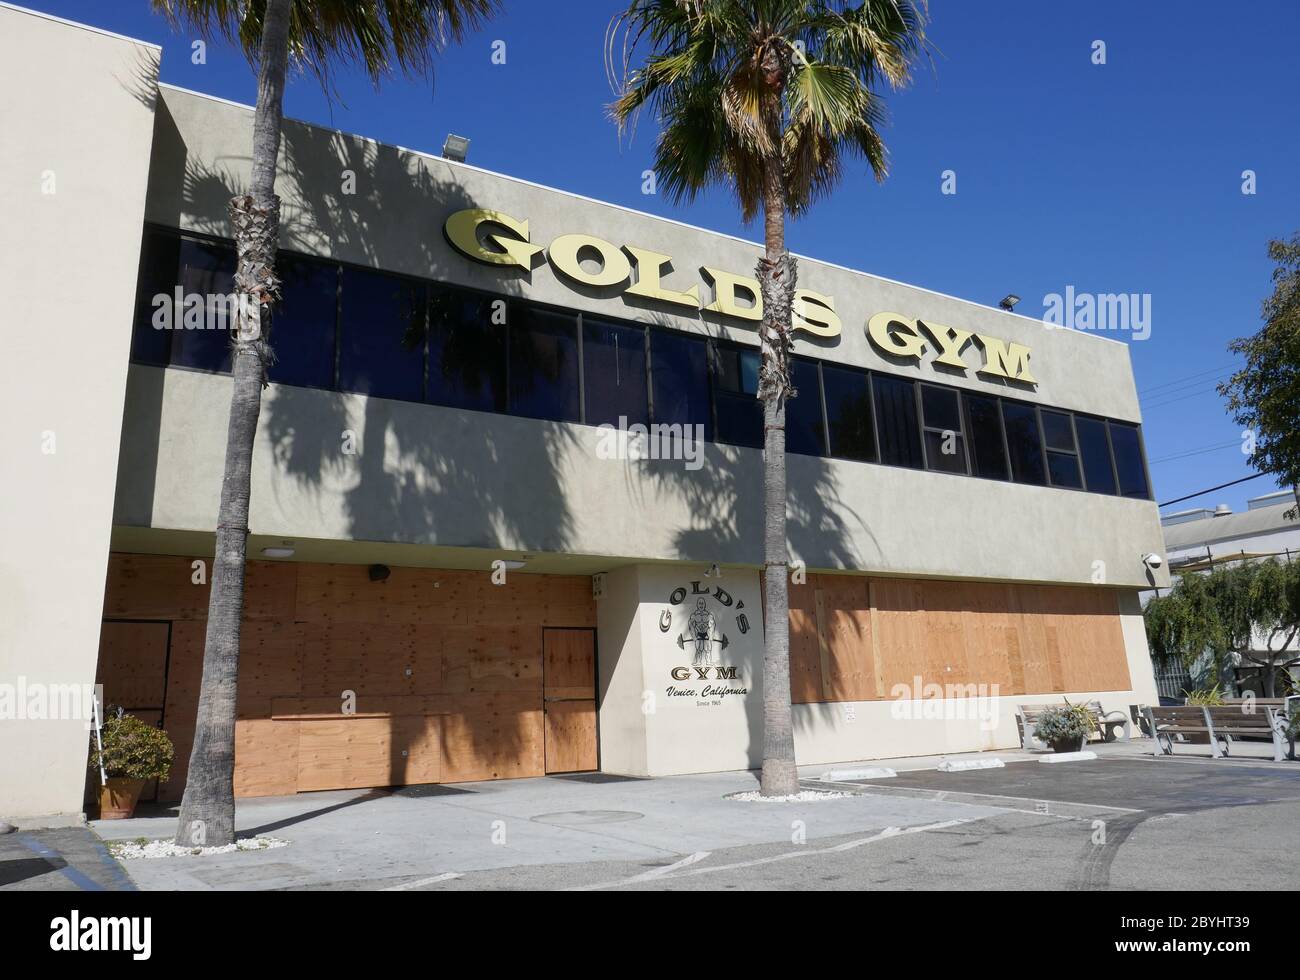 Venice, California, USA 9th June 2020 A general view of atmosphere of closed Boarded Golds Gym at Venice Beach on June 9, 2020 in Venice, California, USA. Photo by Barry King/Alamy Stock Photo Stock Photo